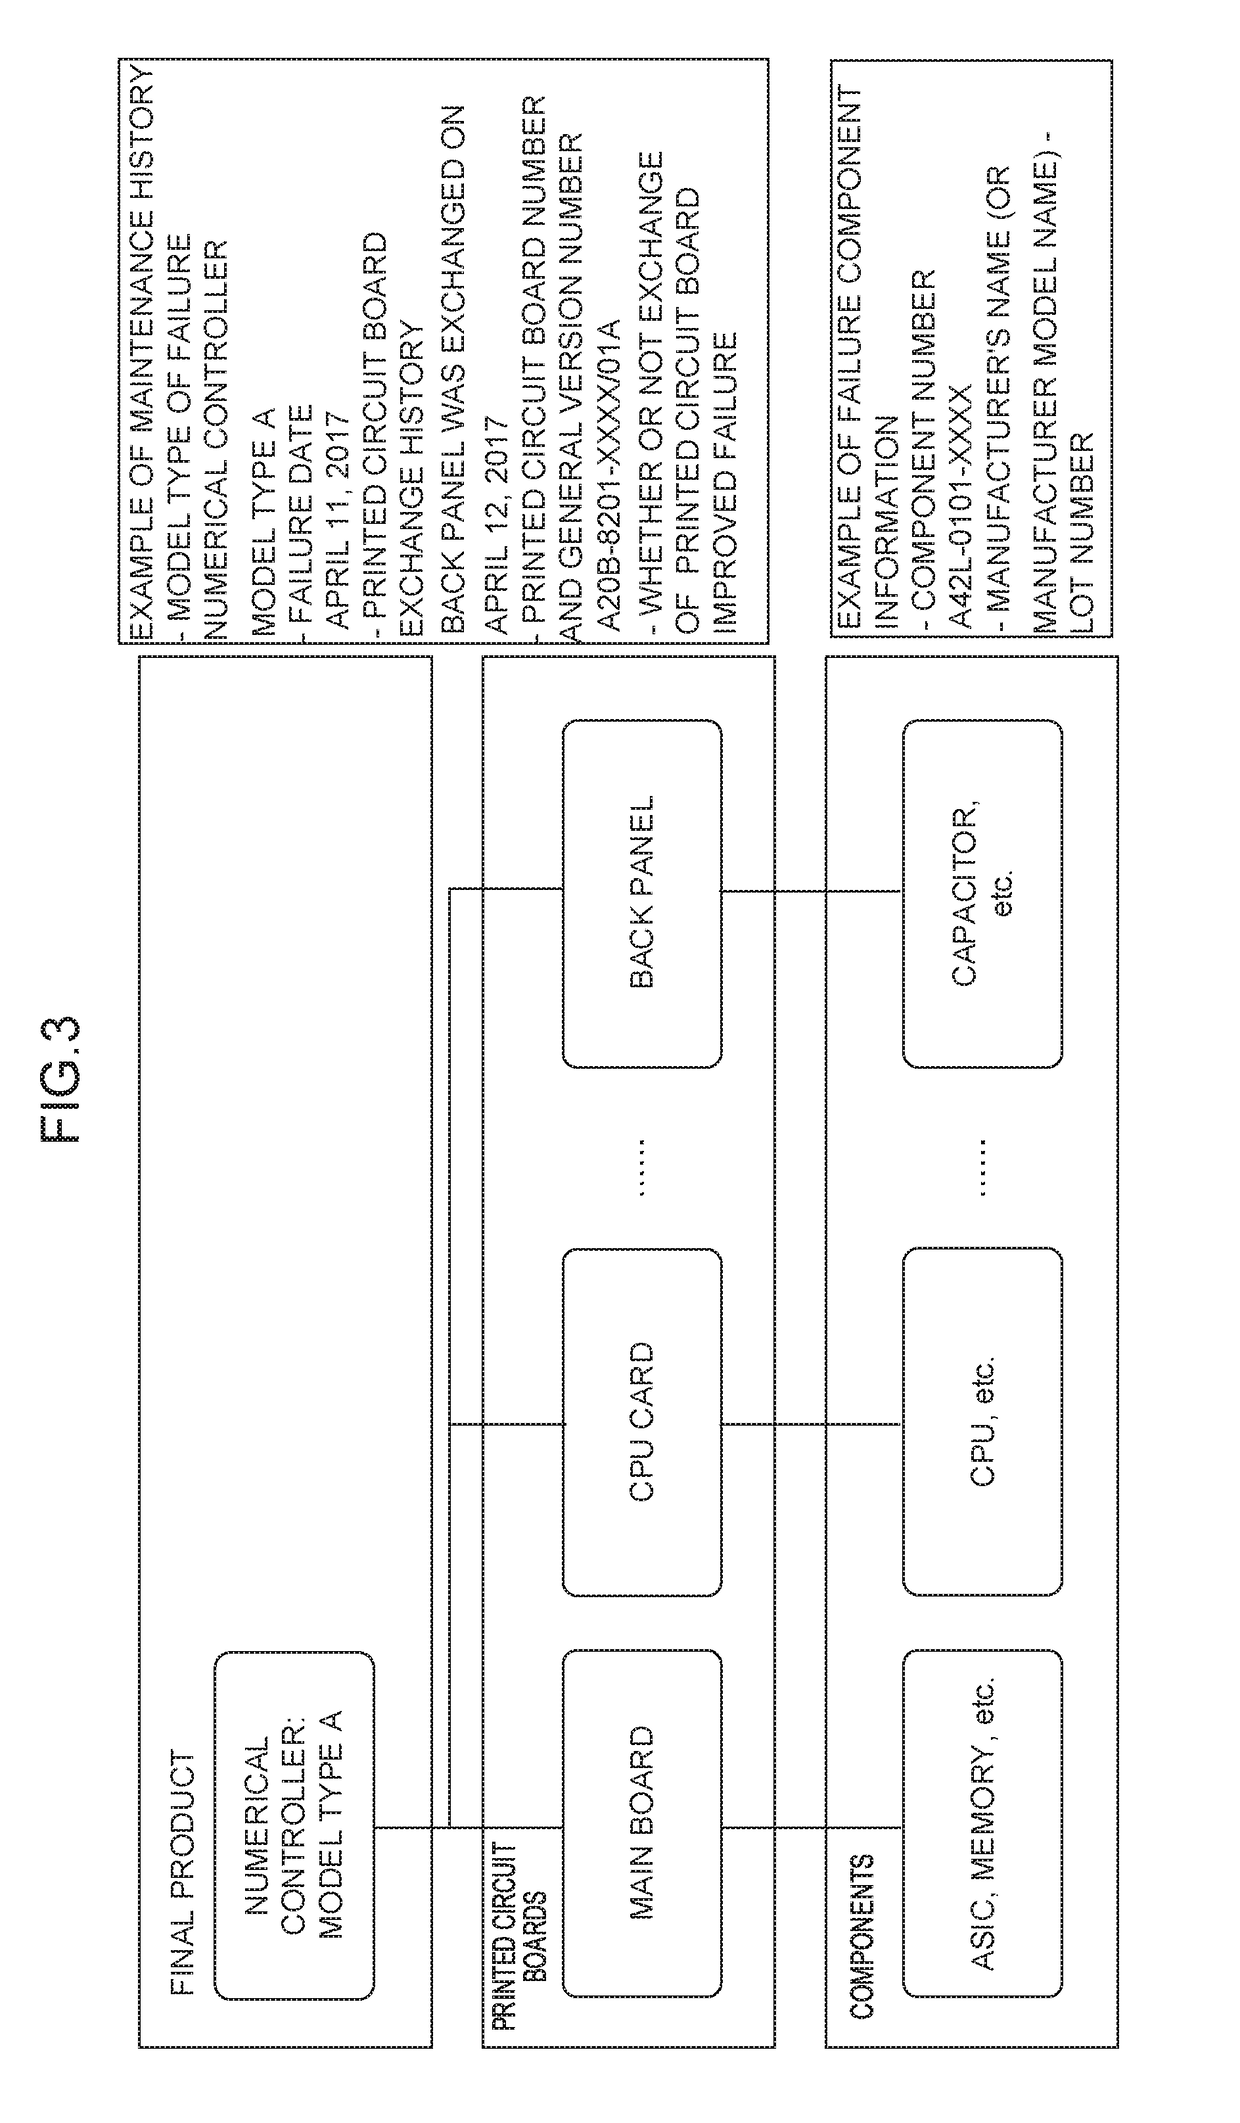 Failure predicting apparatus and machine learning device